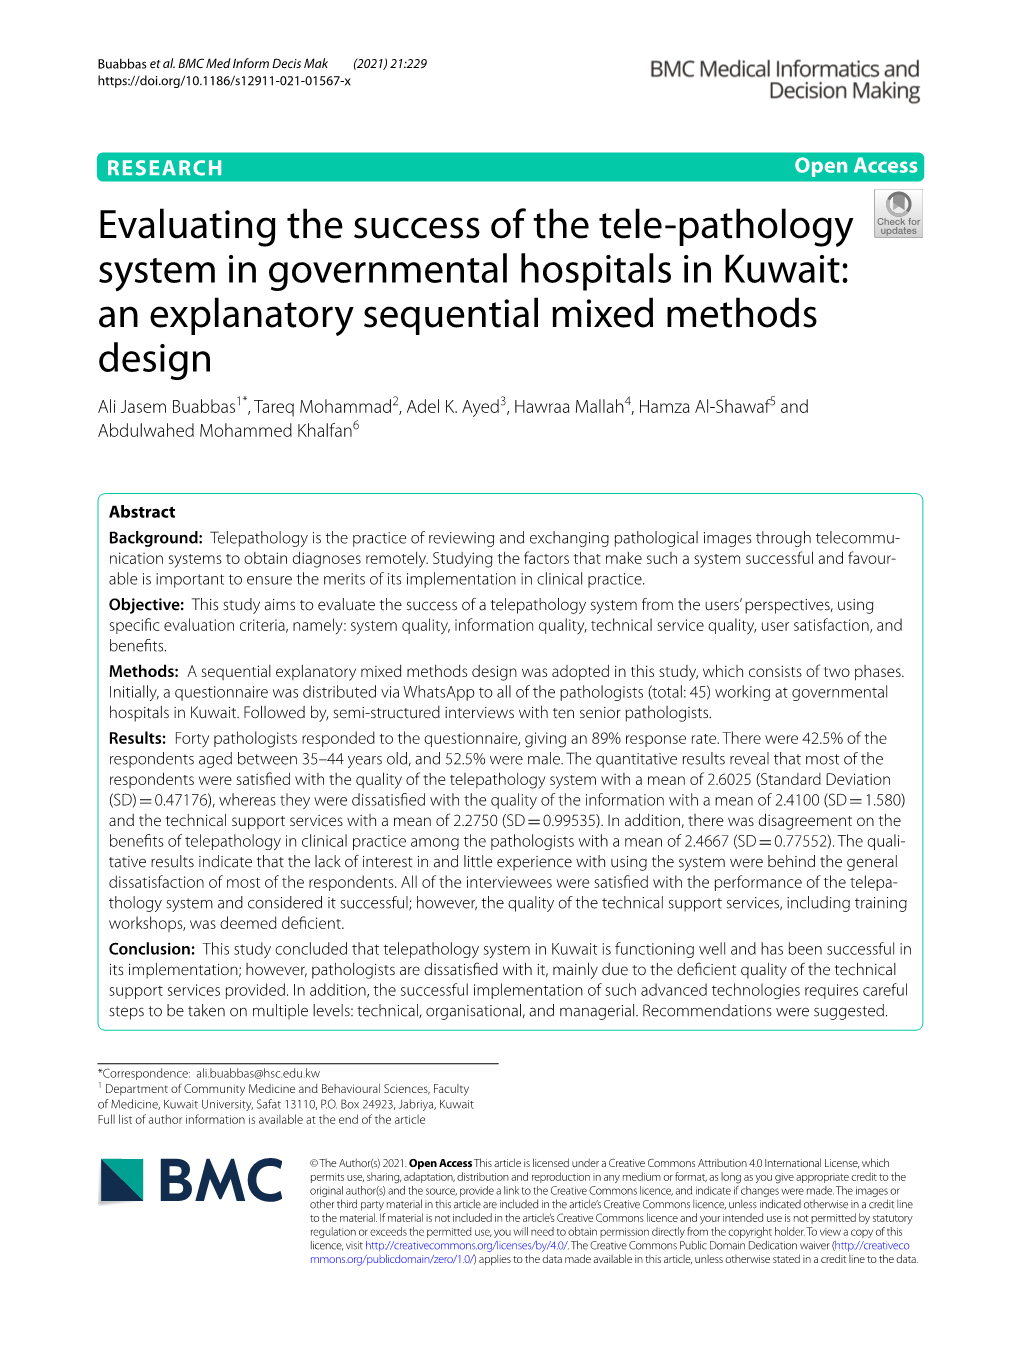 Evaluating the Success of the Tele-Pathology System In